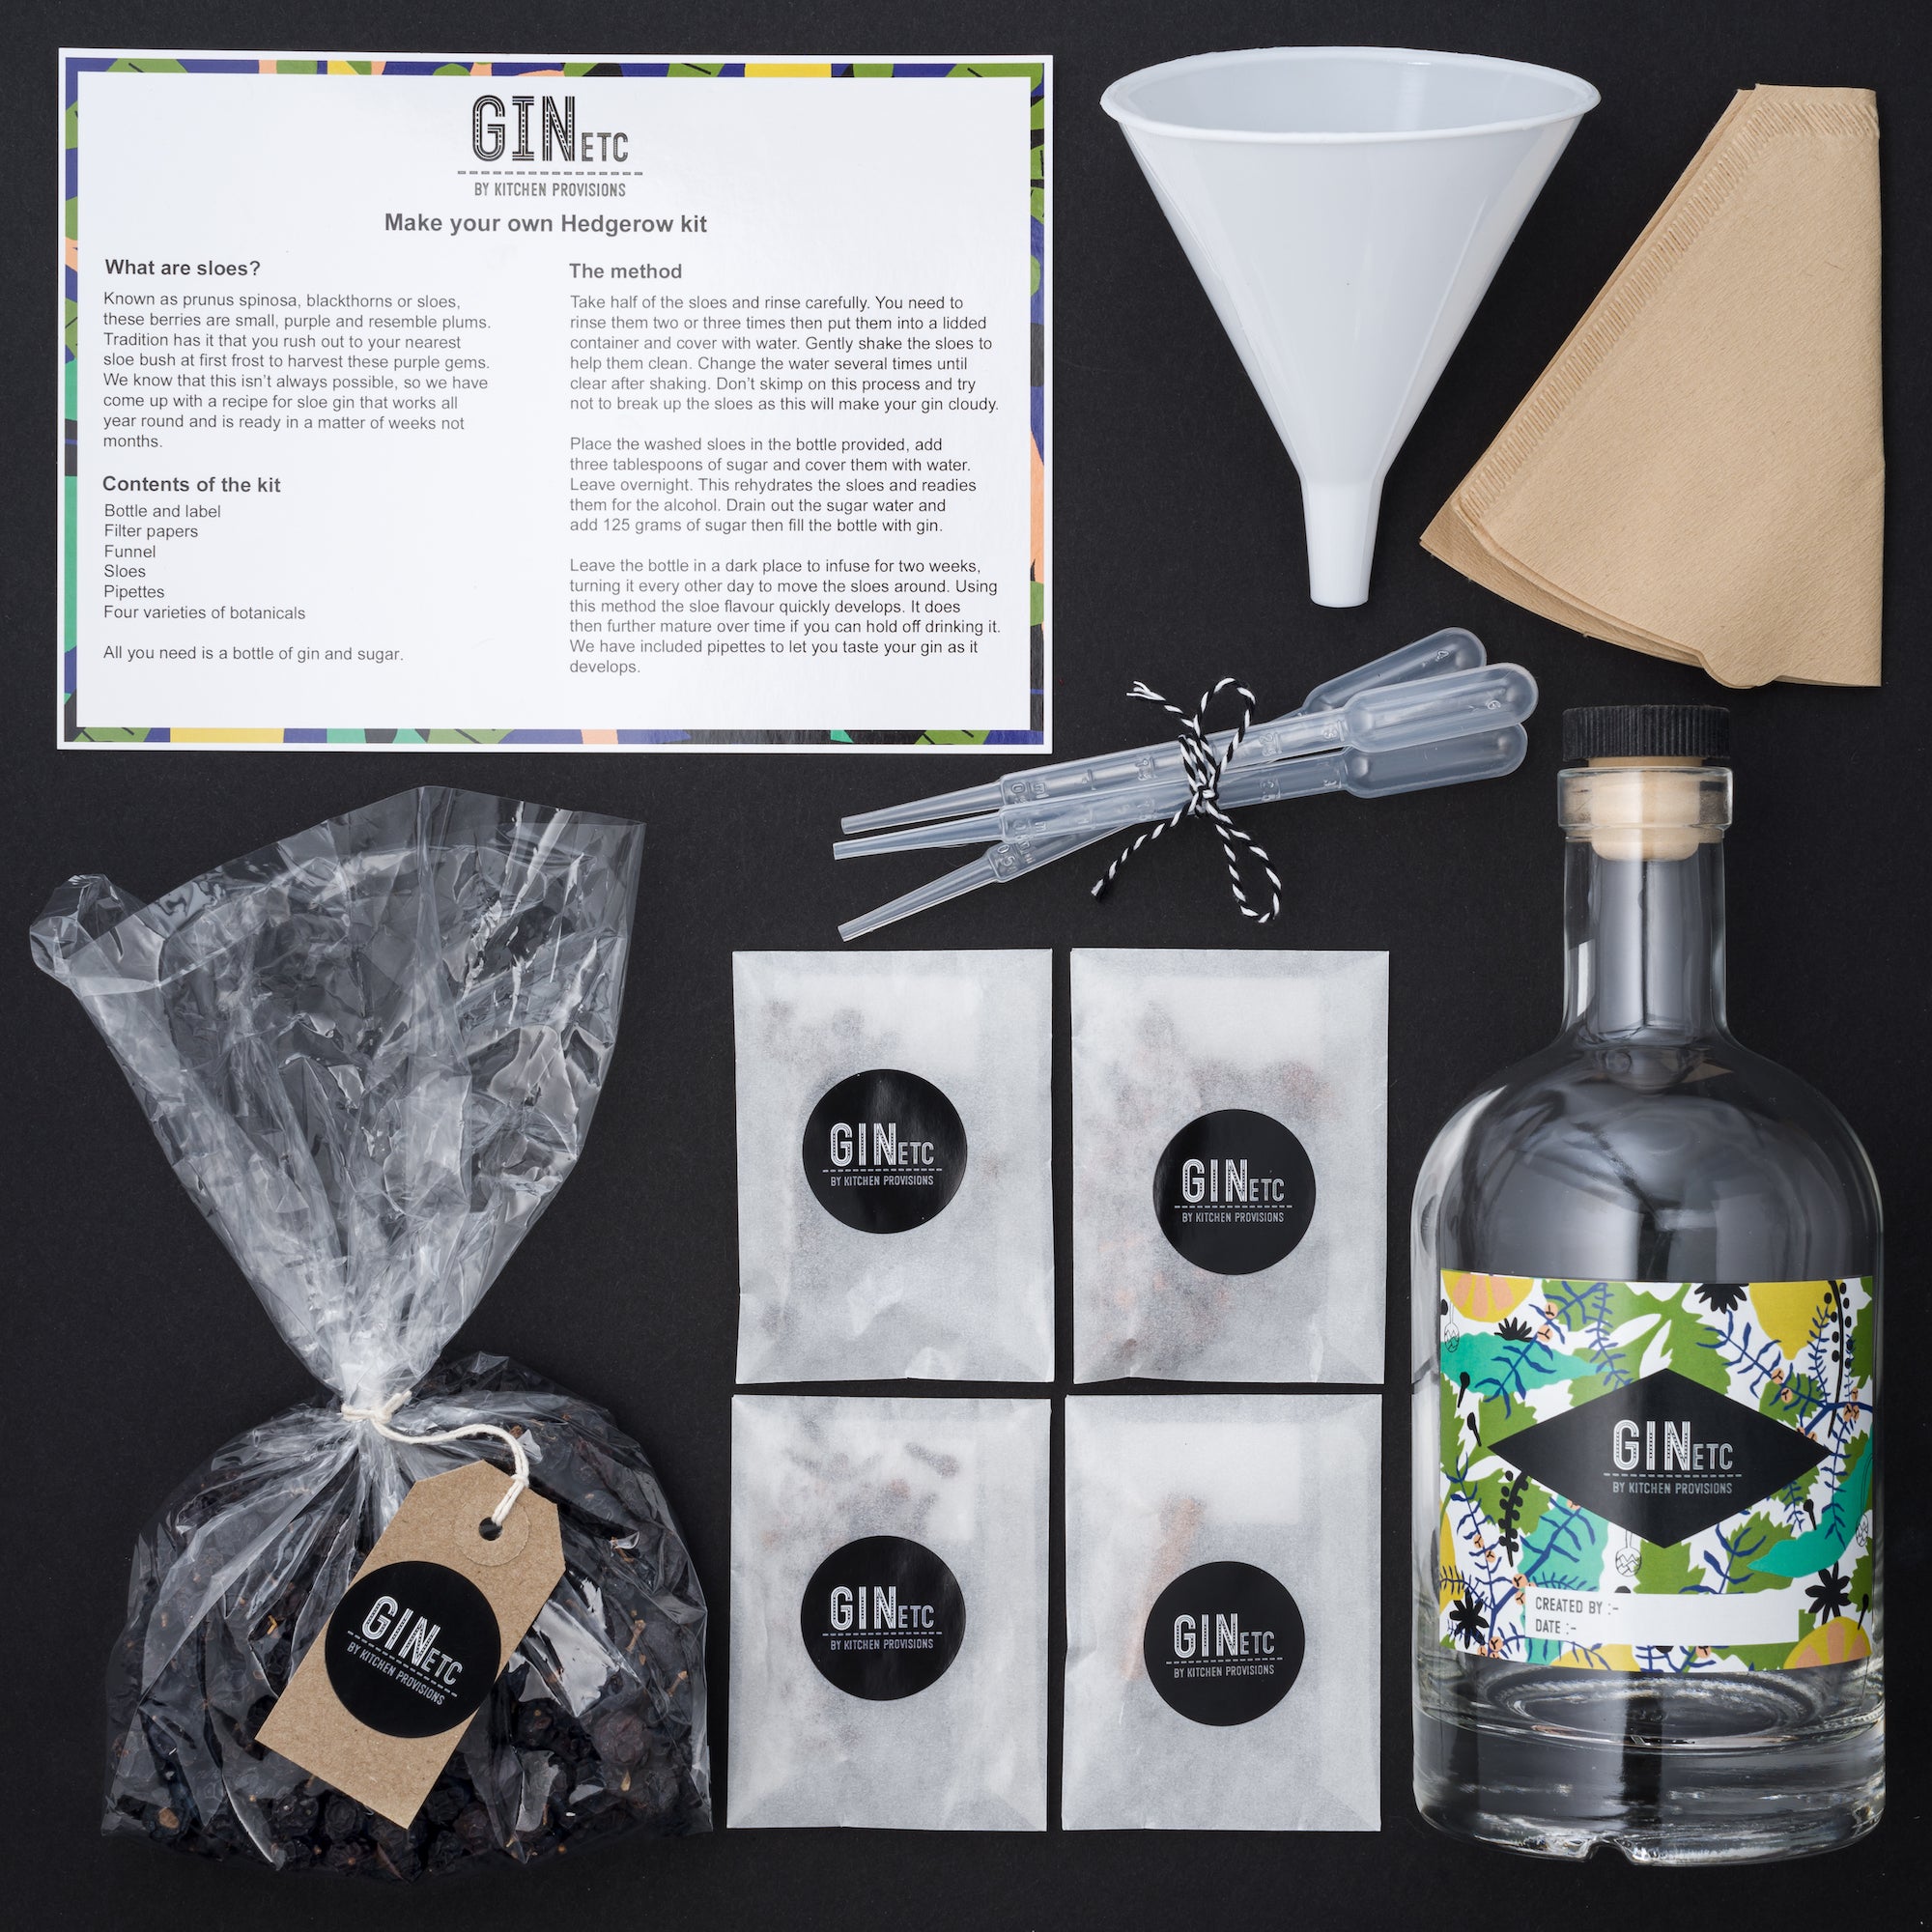 Gin Etc. Gin Maker's Kit - The Hedgerow Create your own Blended Sloe Gin